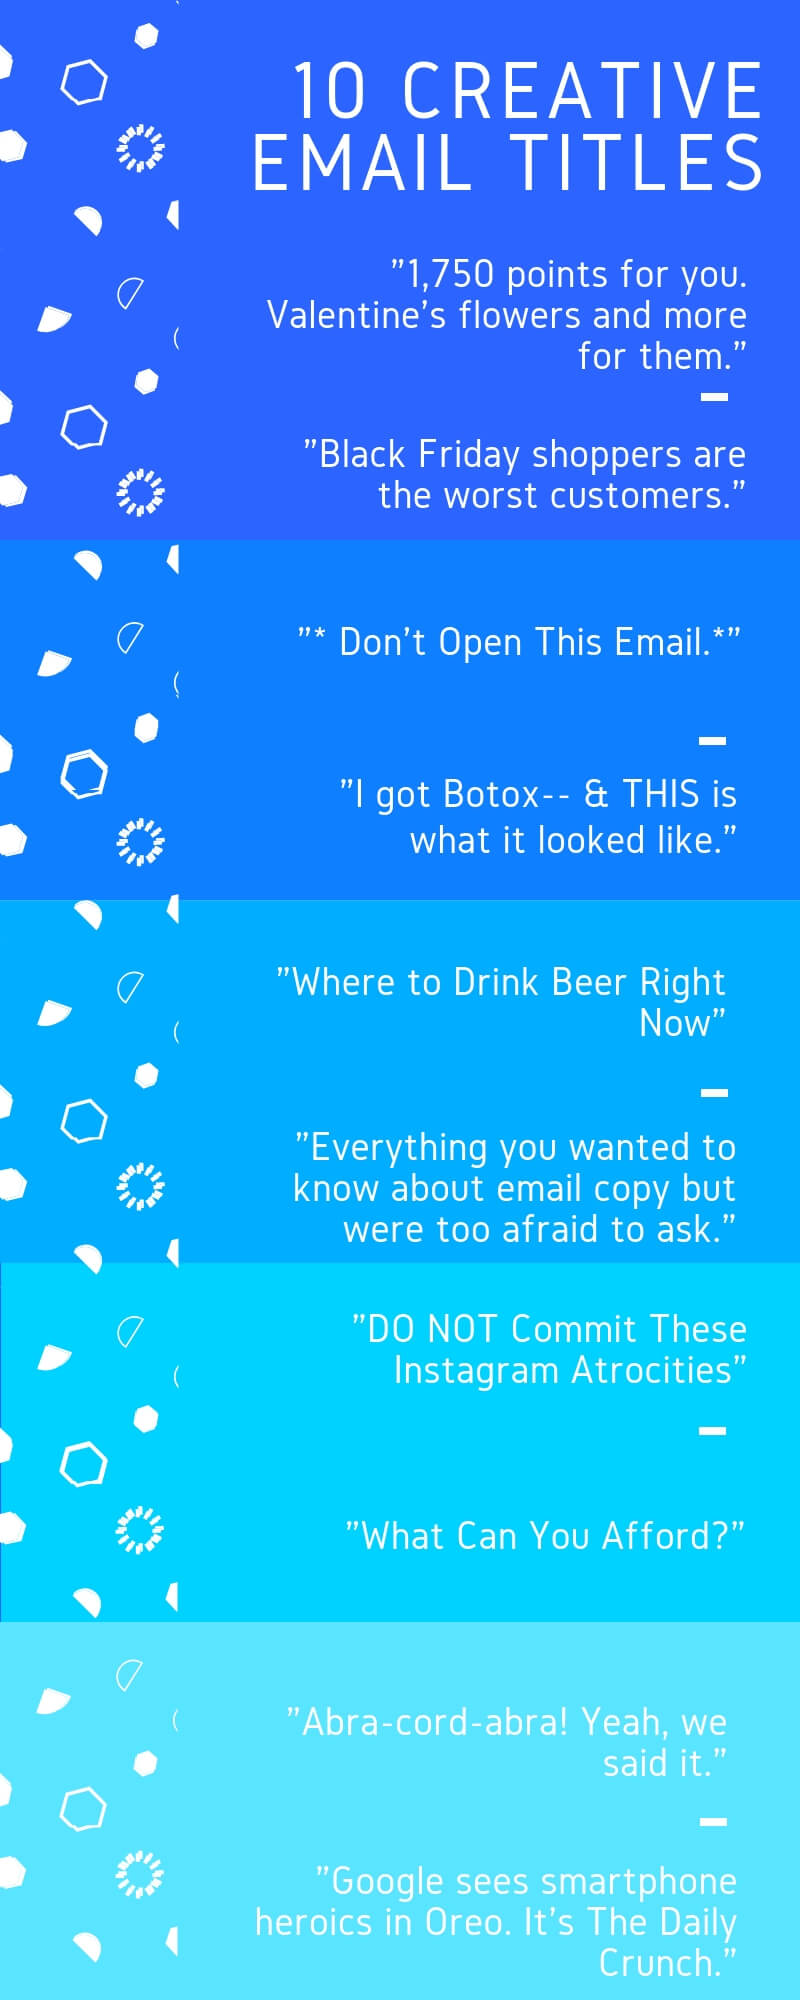 10 Creative Email titles